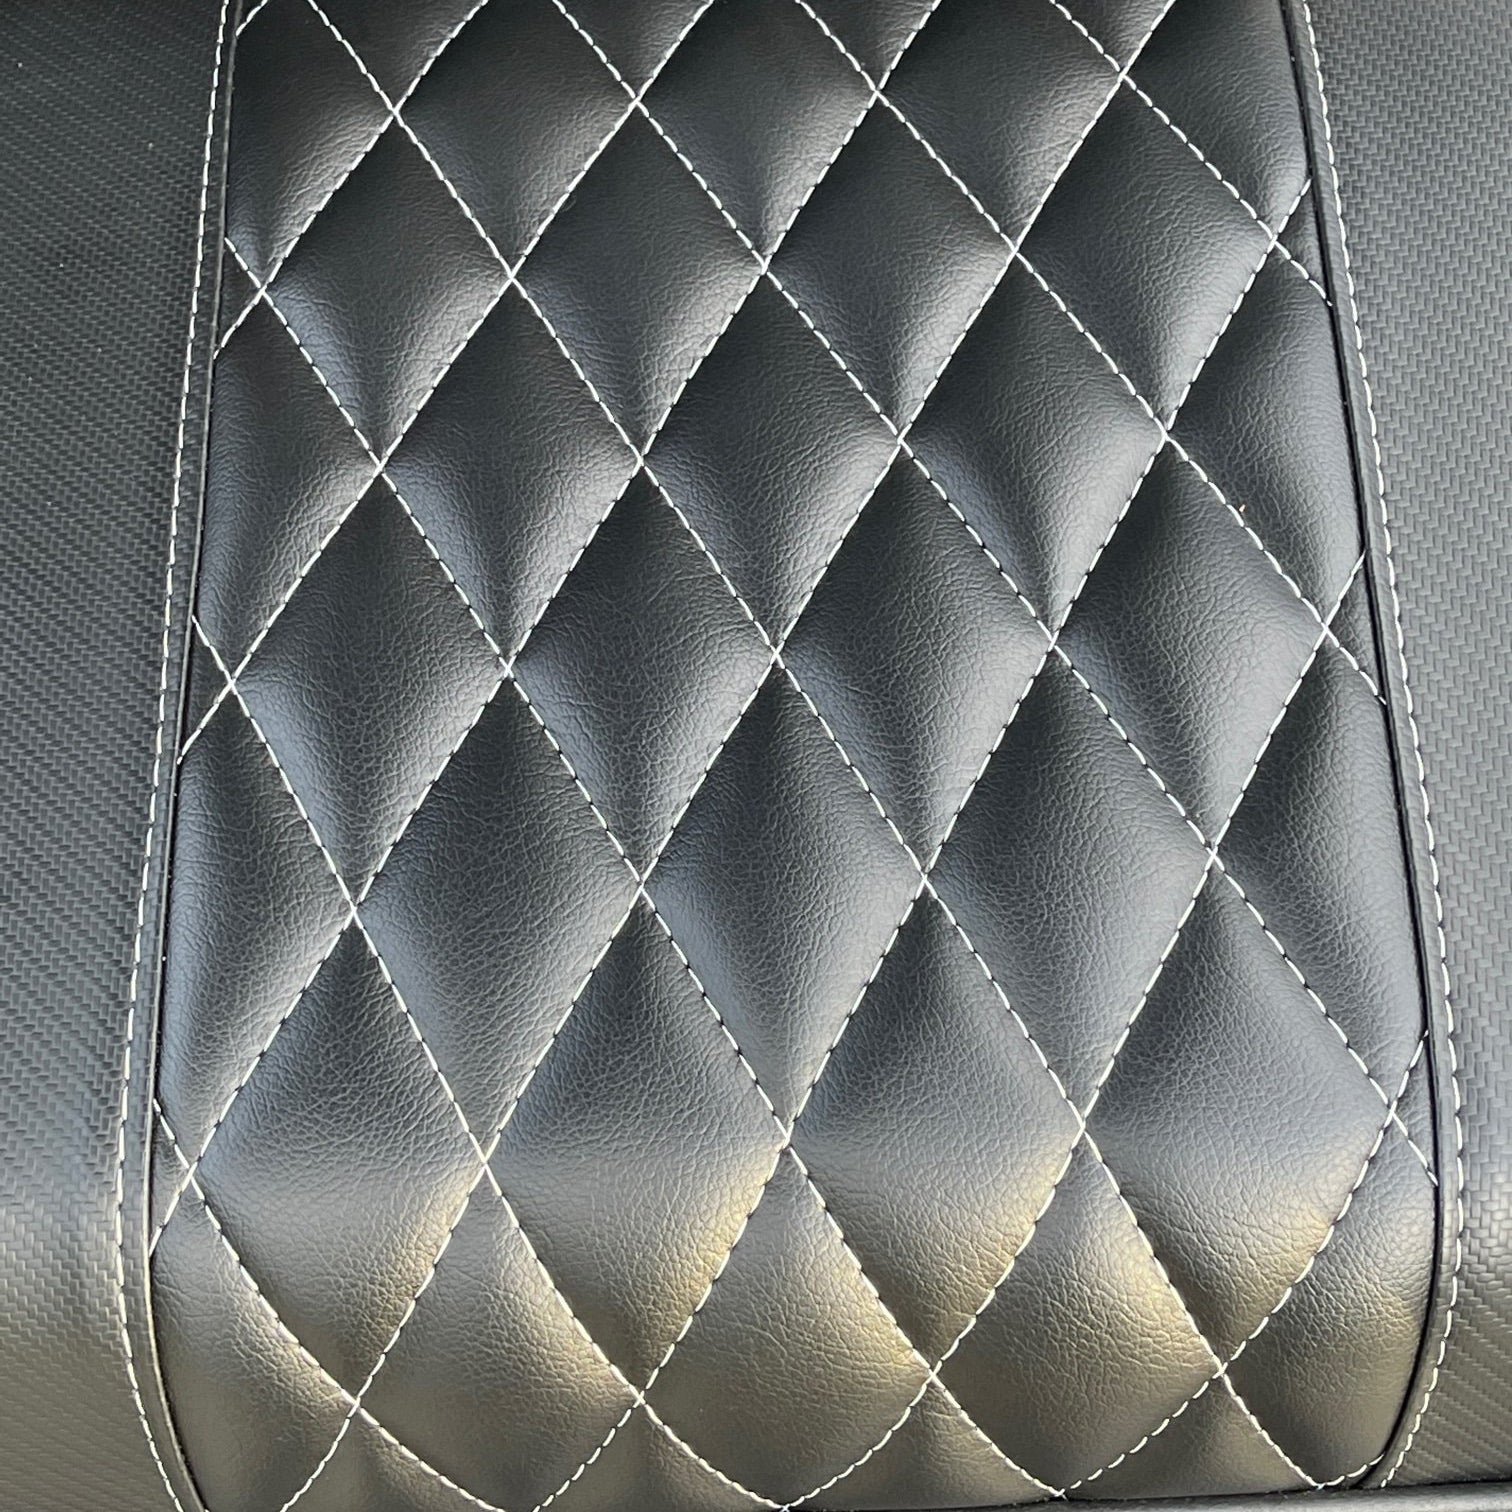 Icon 4 Passenger Golf Cart Seat Covers - Carbon Fiber Black with Black Diamond and White Stitching